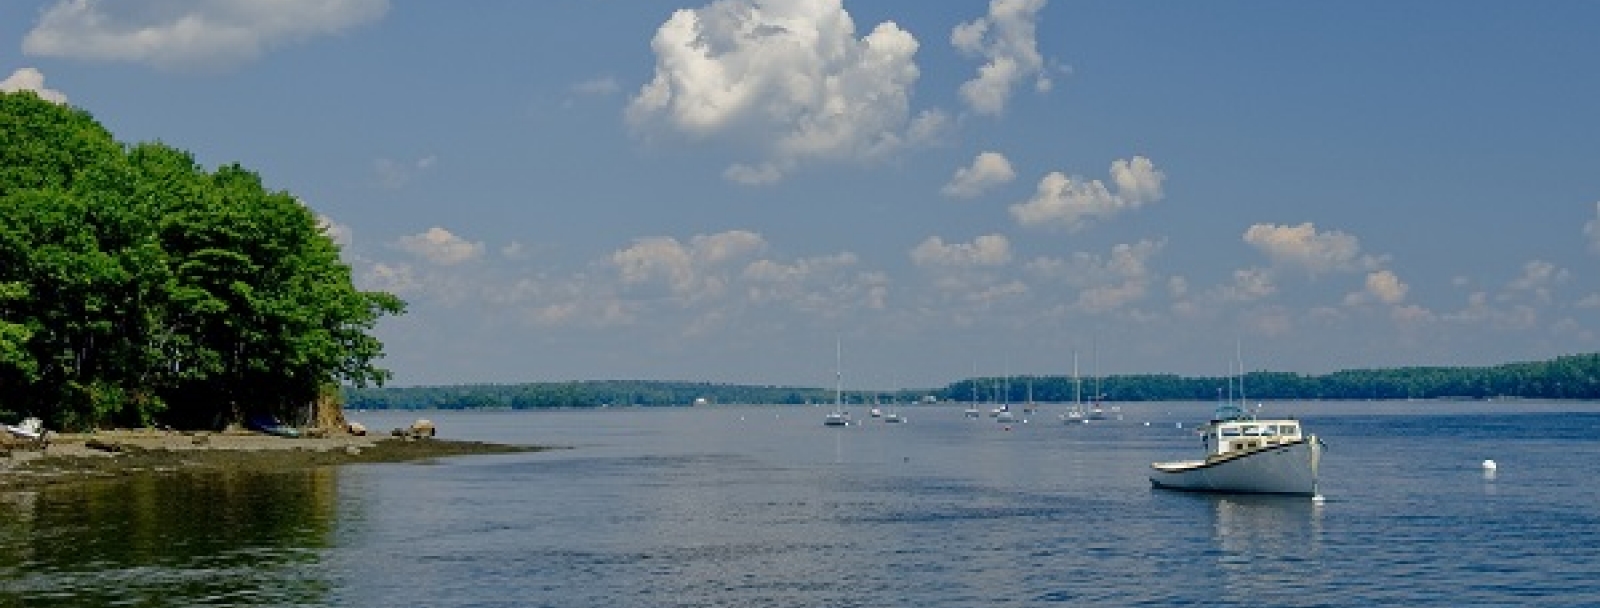 boats on Great Bay